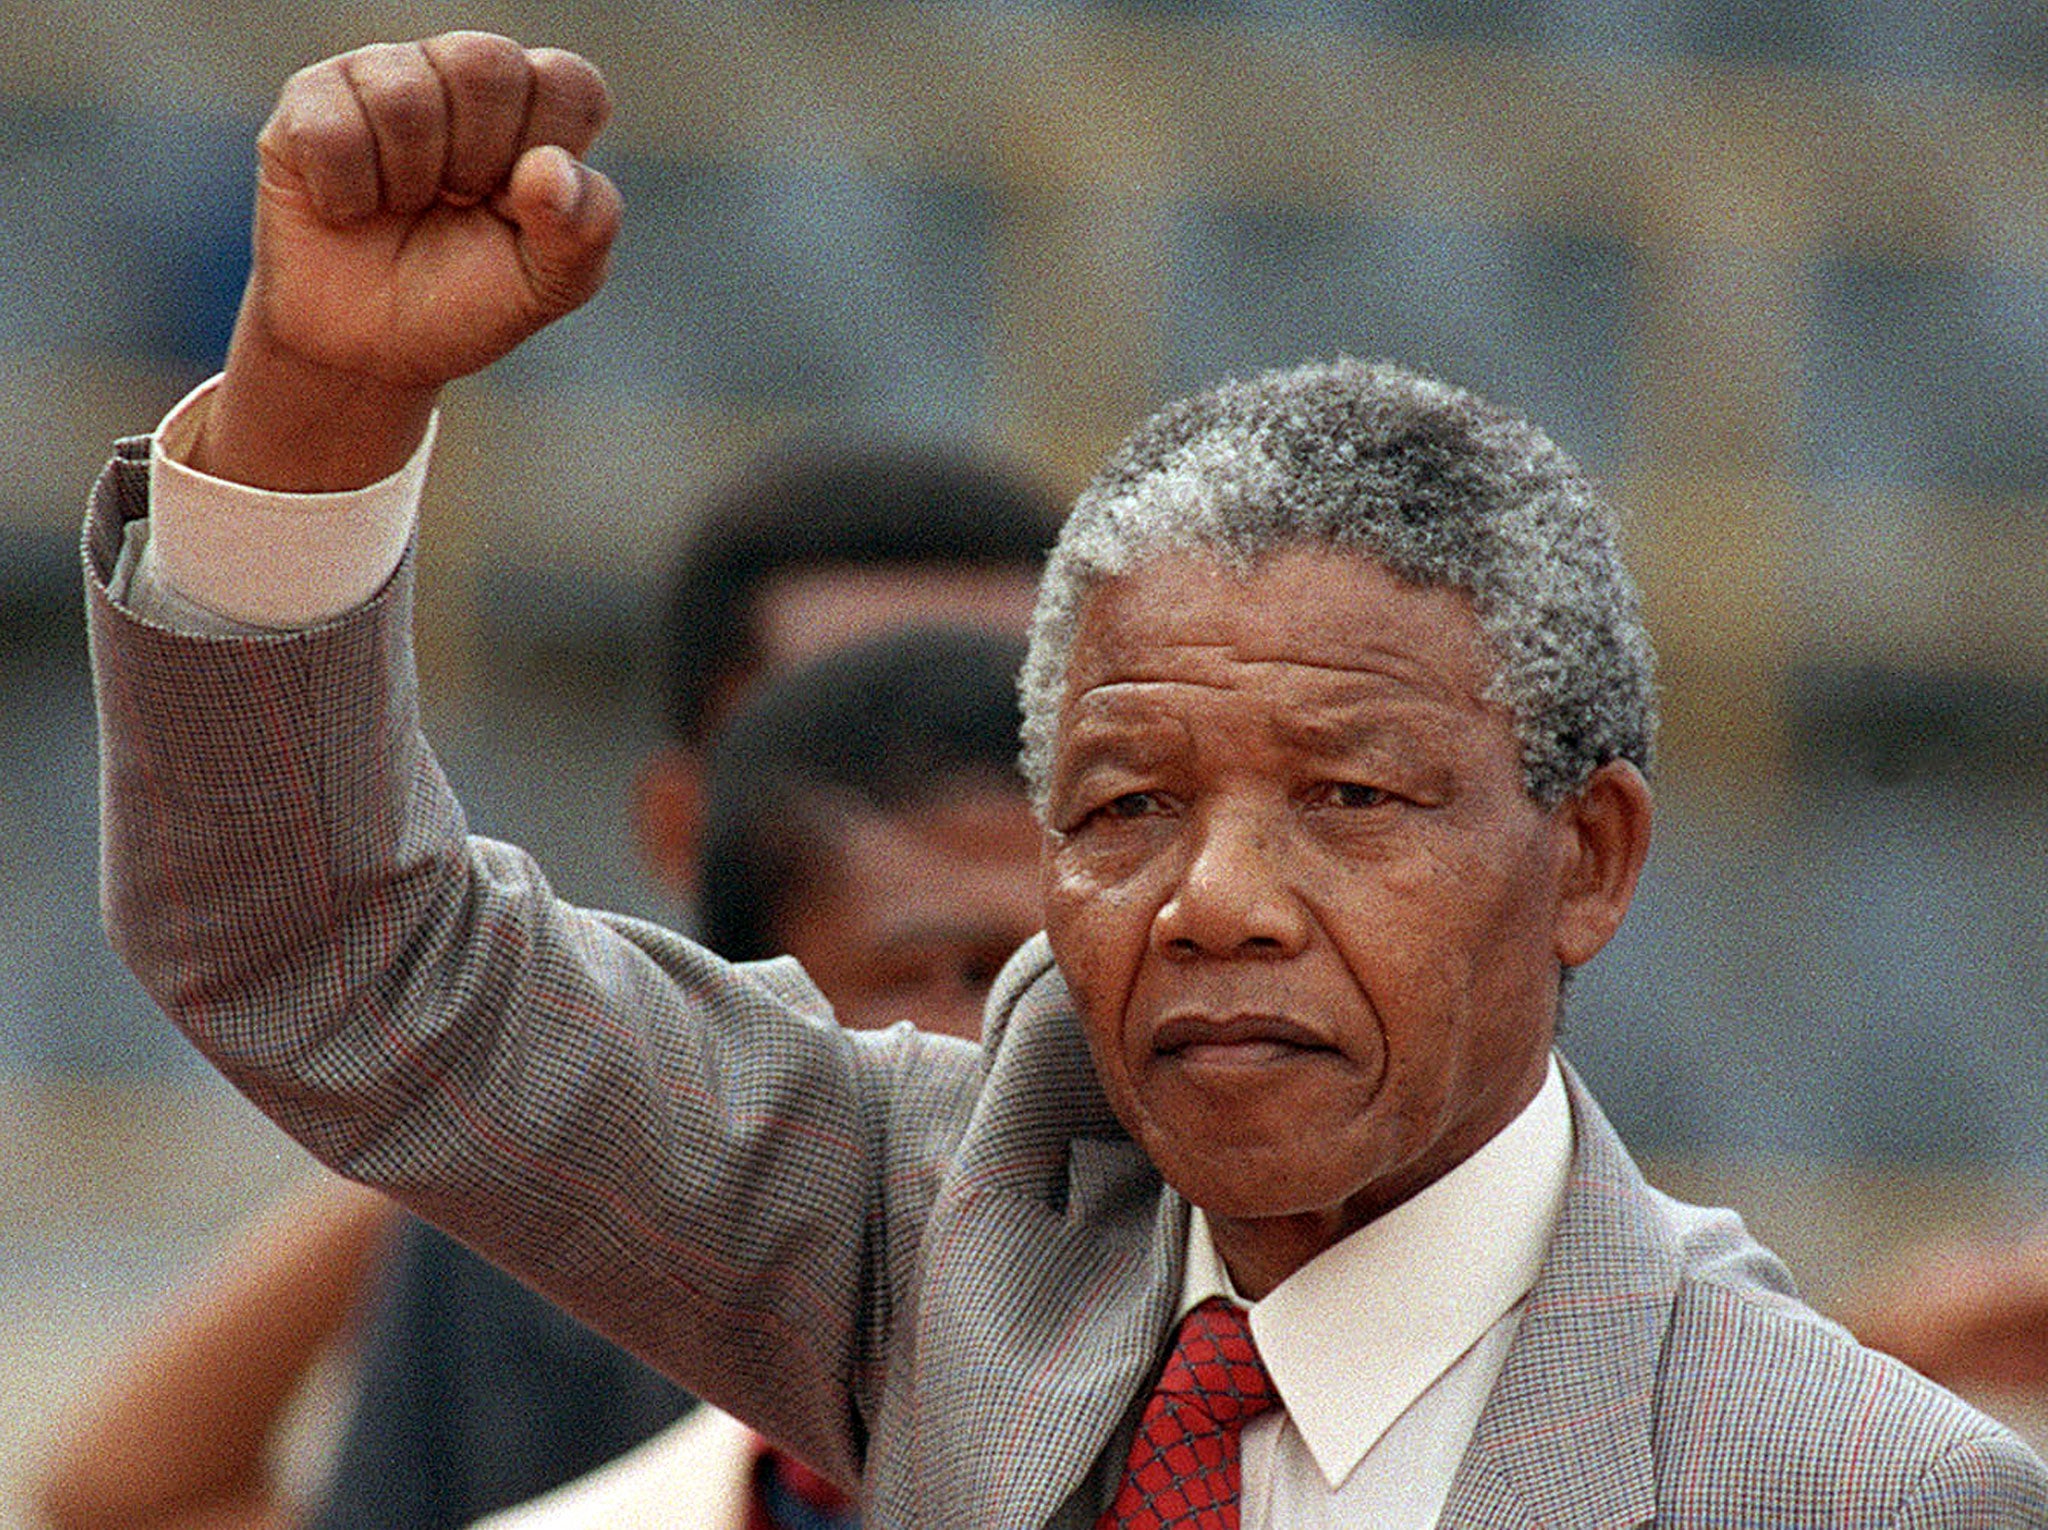 Anti-apartheid leader and African National Congress (ANC) member Nelson Mandela raises clenched fist, arriving to address mass rally, a few days after his release from jail, 25 February 1990, in the conservative Afrikaaner town of Bloemfontein, where ANC was formed 75 years ago.